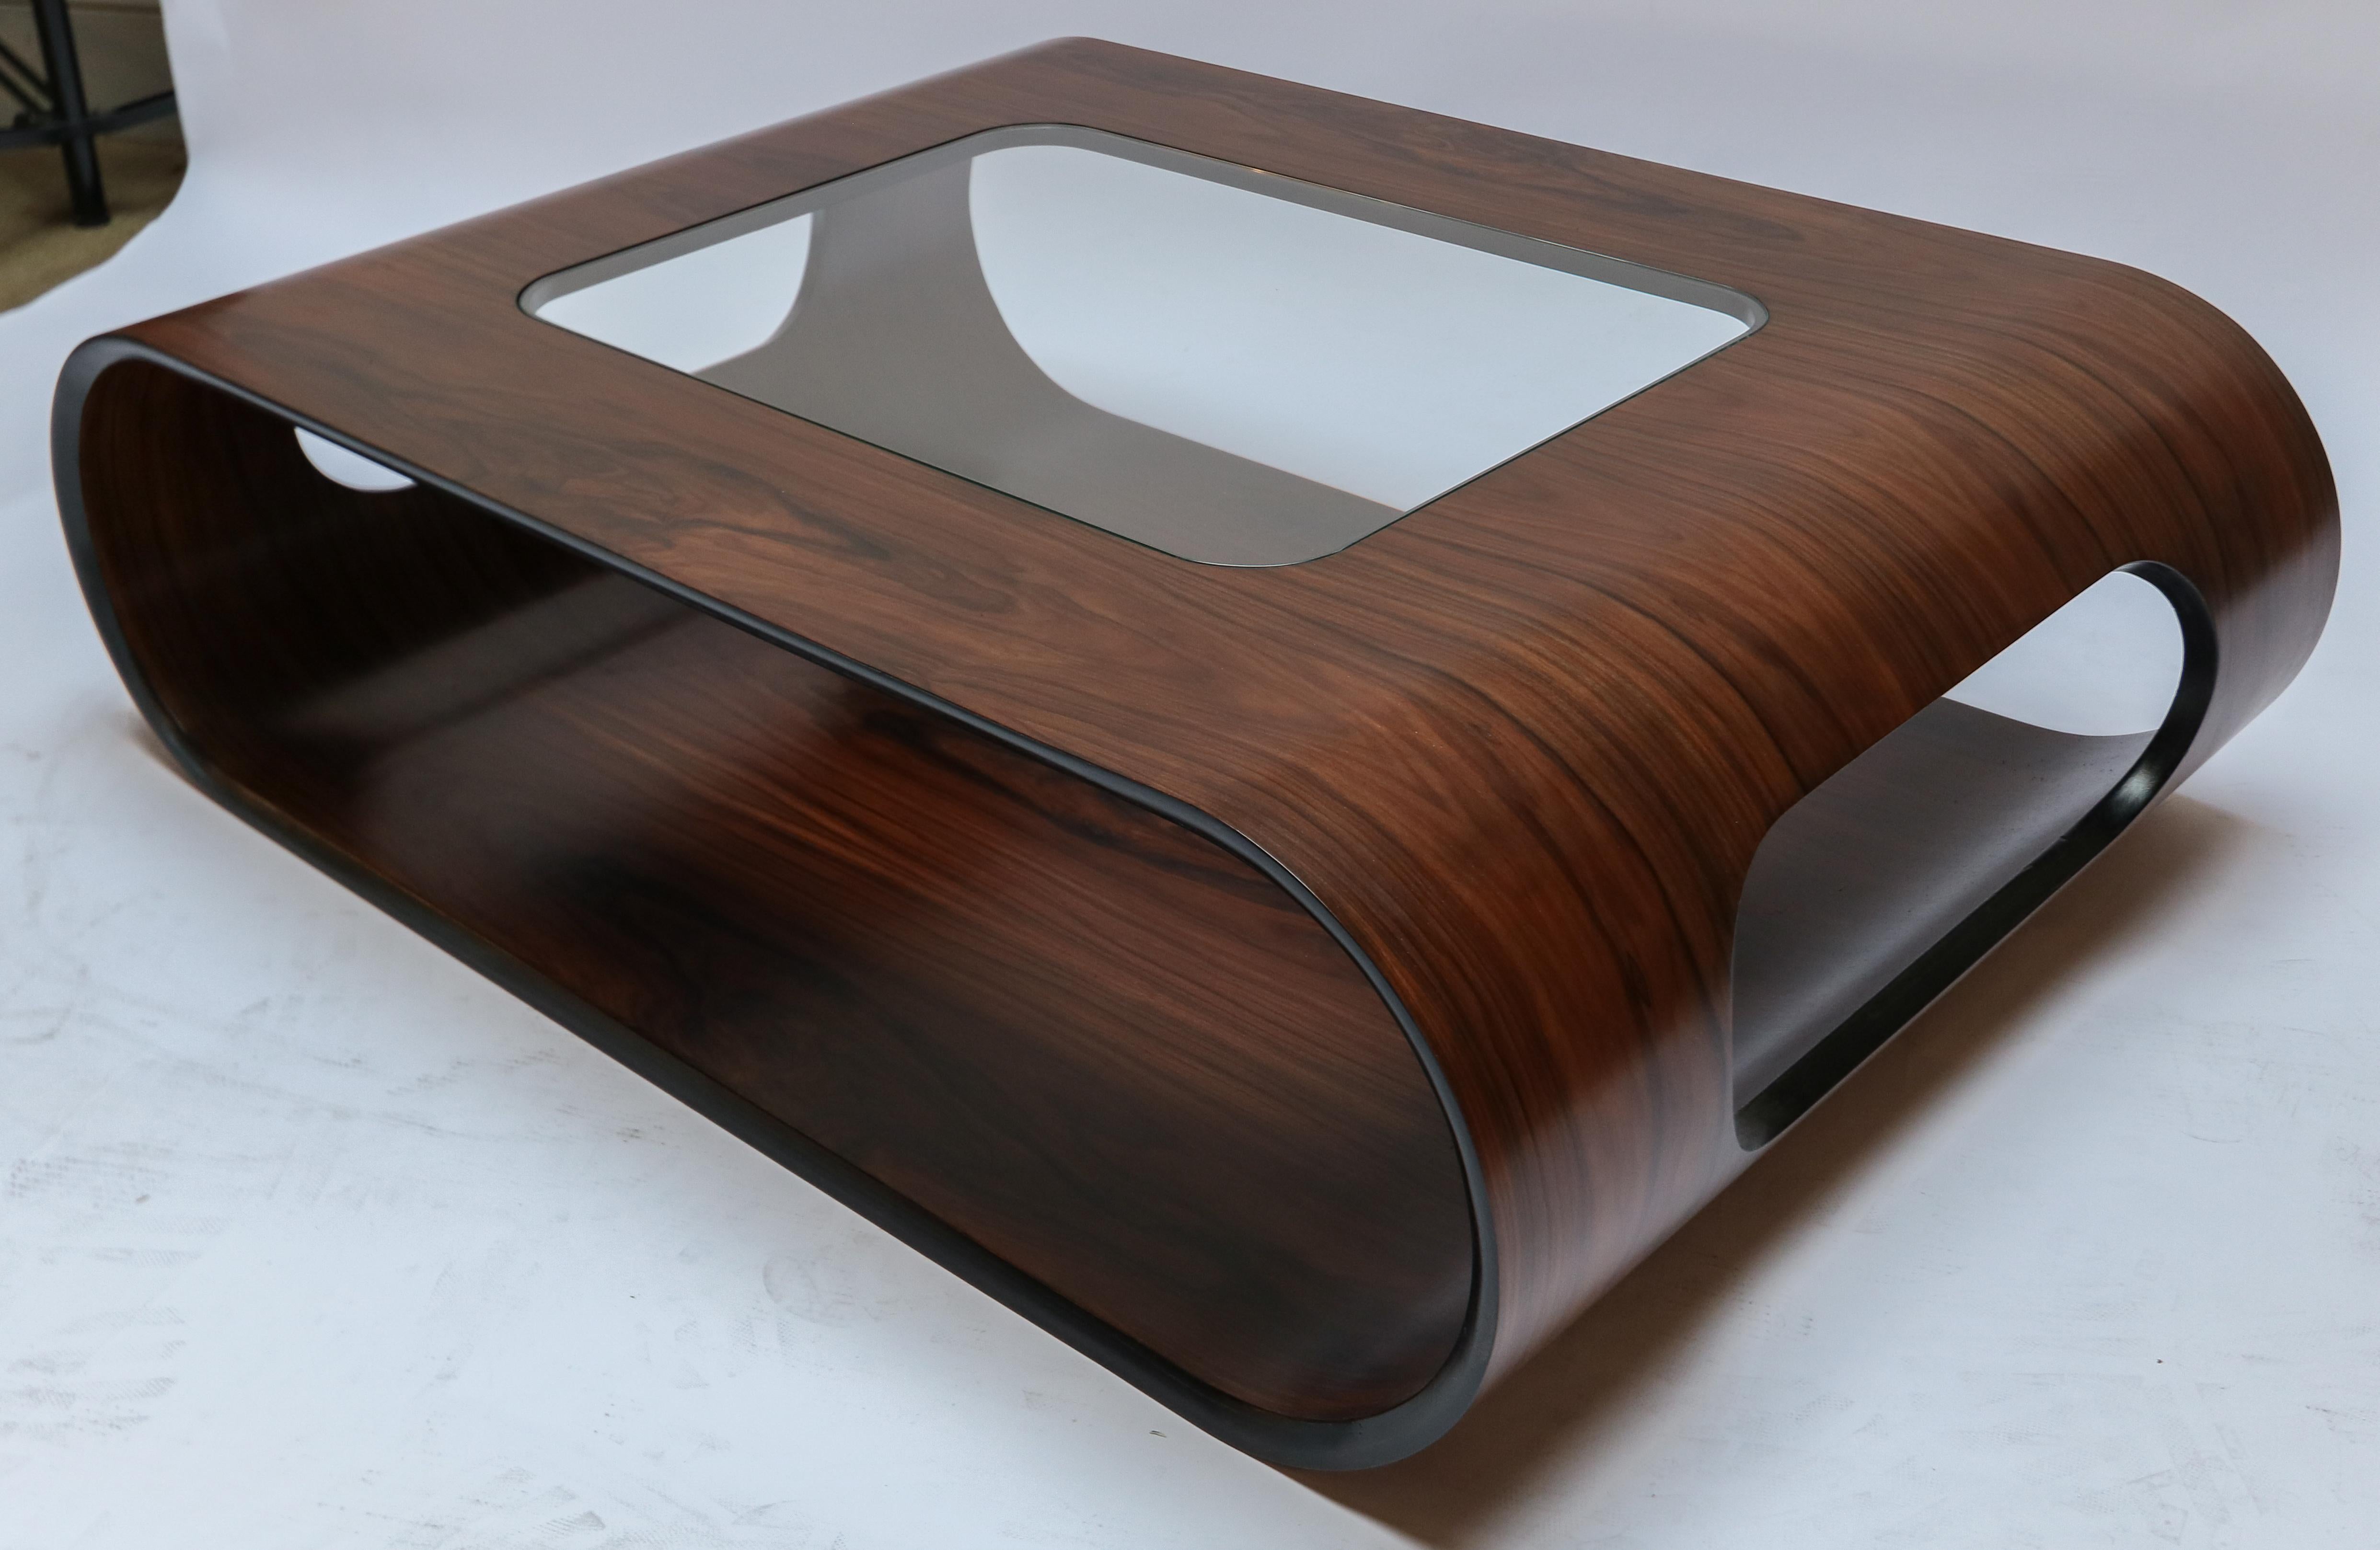 Custom midcentury style curved rosewood coffee table with inset glass top.  Made in Los Angeles by Adesso Imports.

Can be done in different sizes and woods.